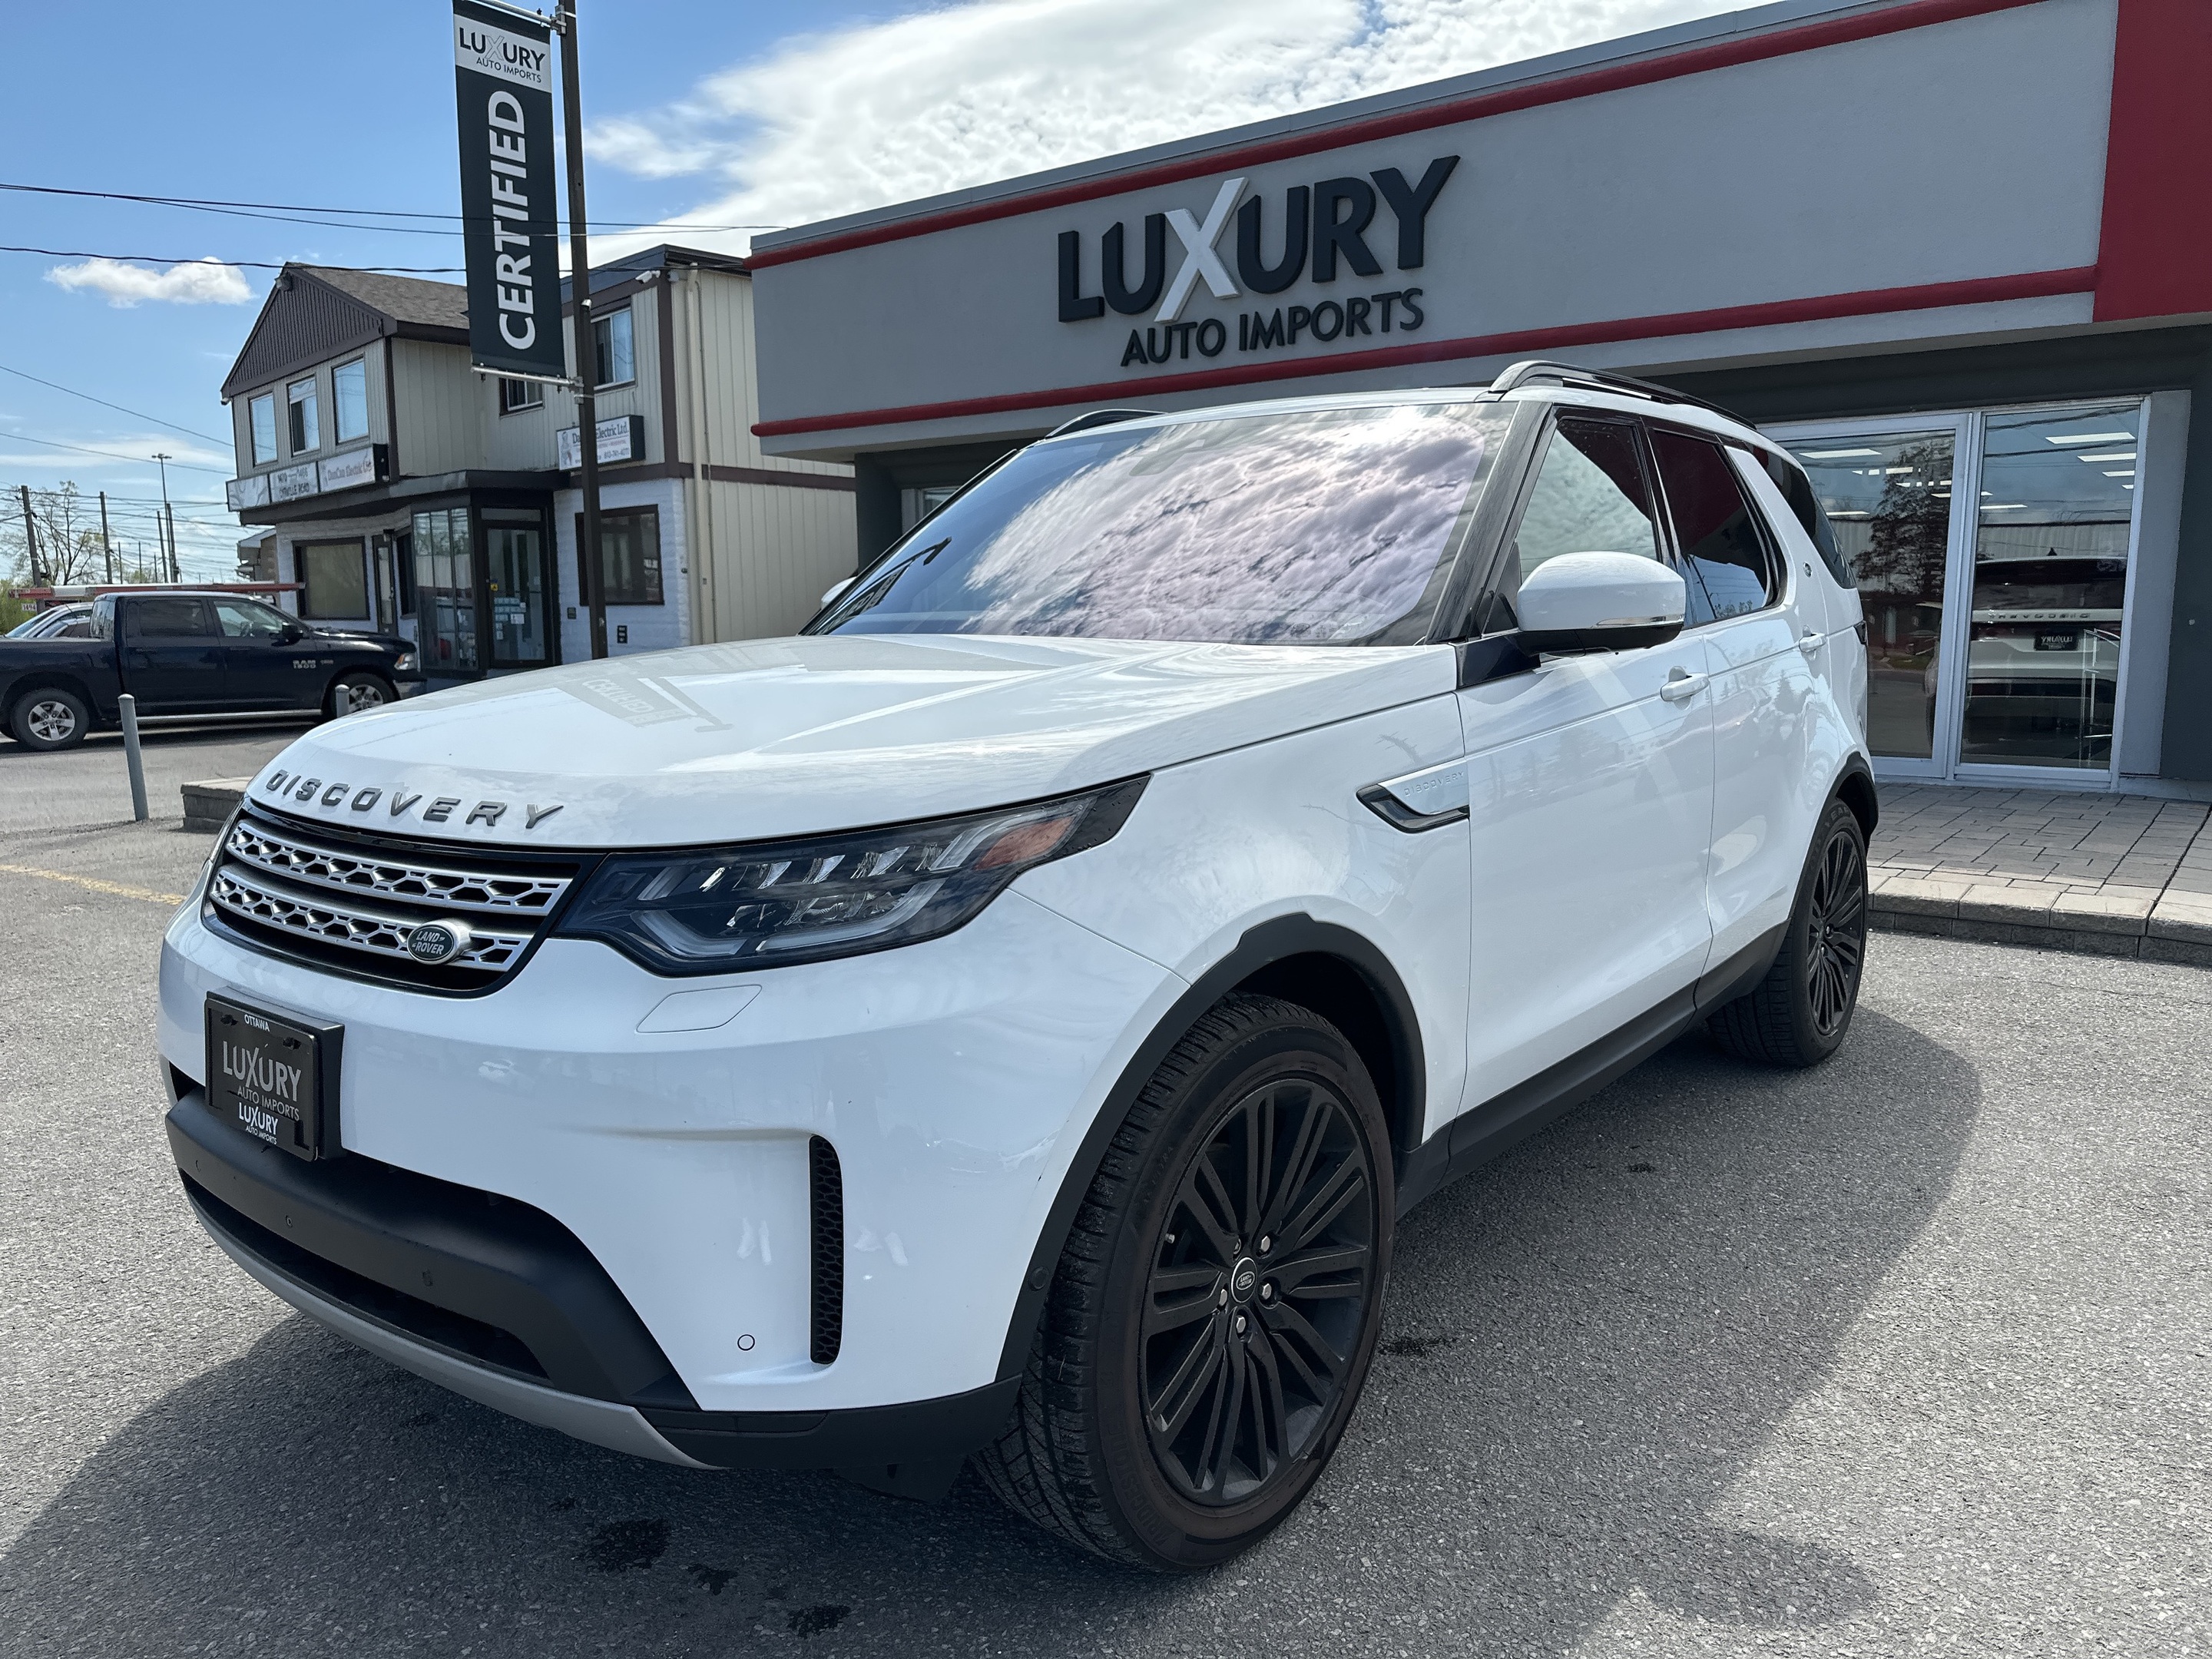 2019 Land Rover Discovery HSE-td6 diesel-Nav-panoroof-clean carfax -loaded